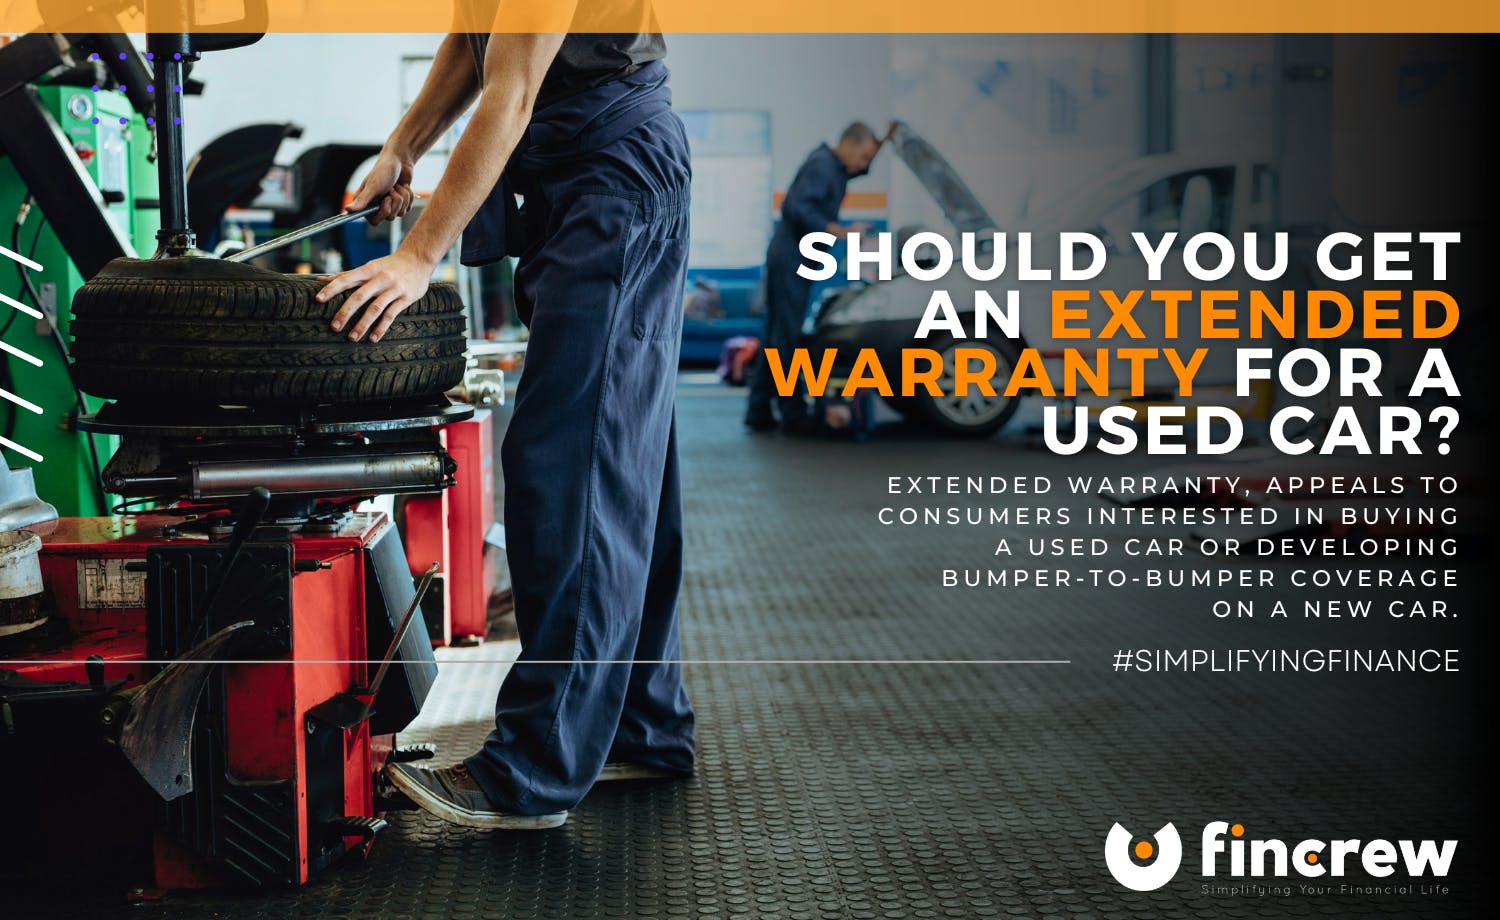 Should You Get An Extended Warranty For Your Used Car?